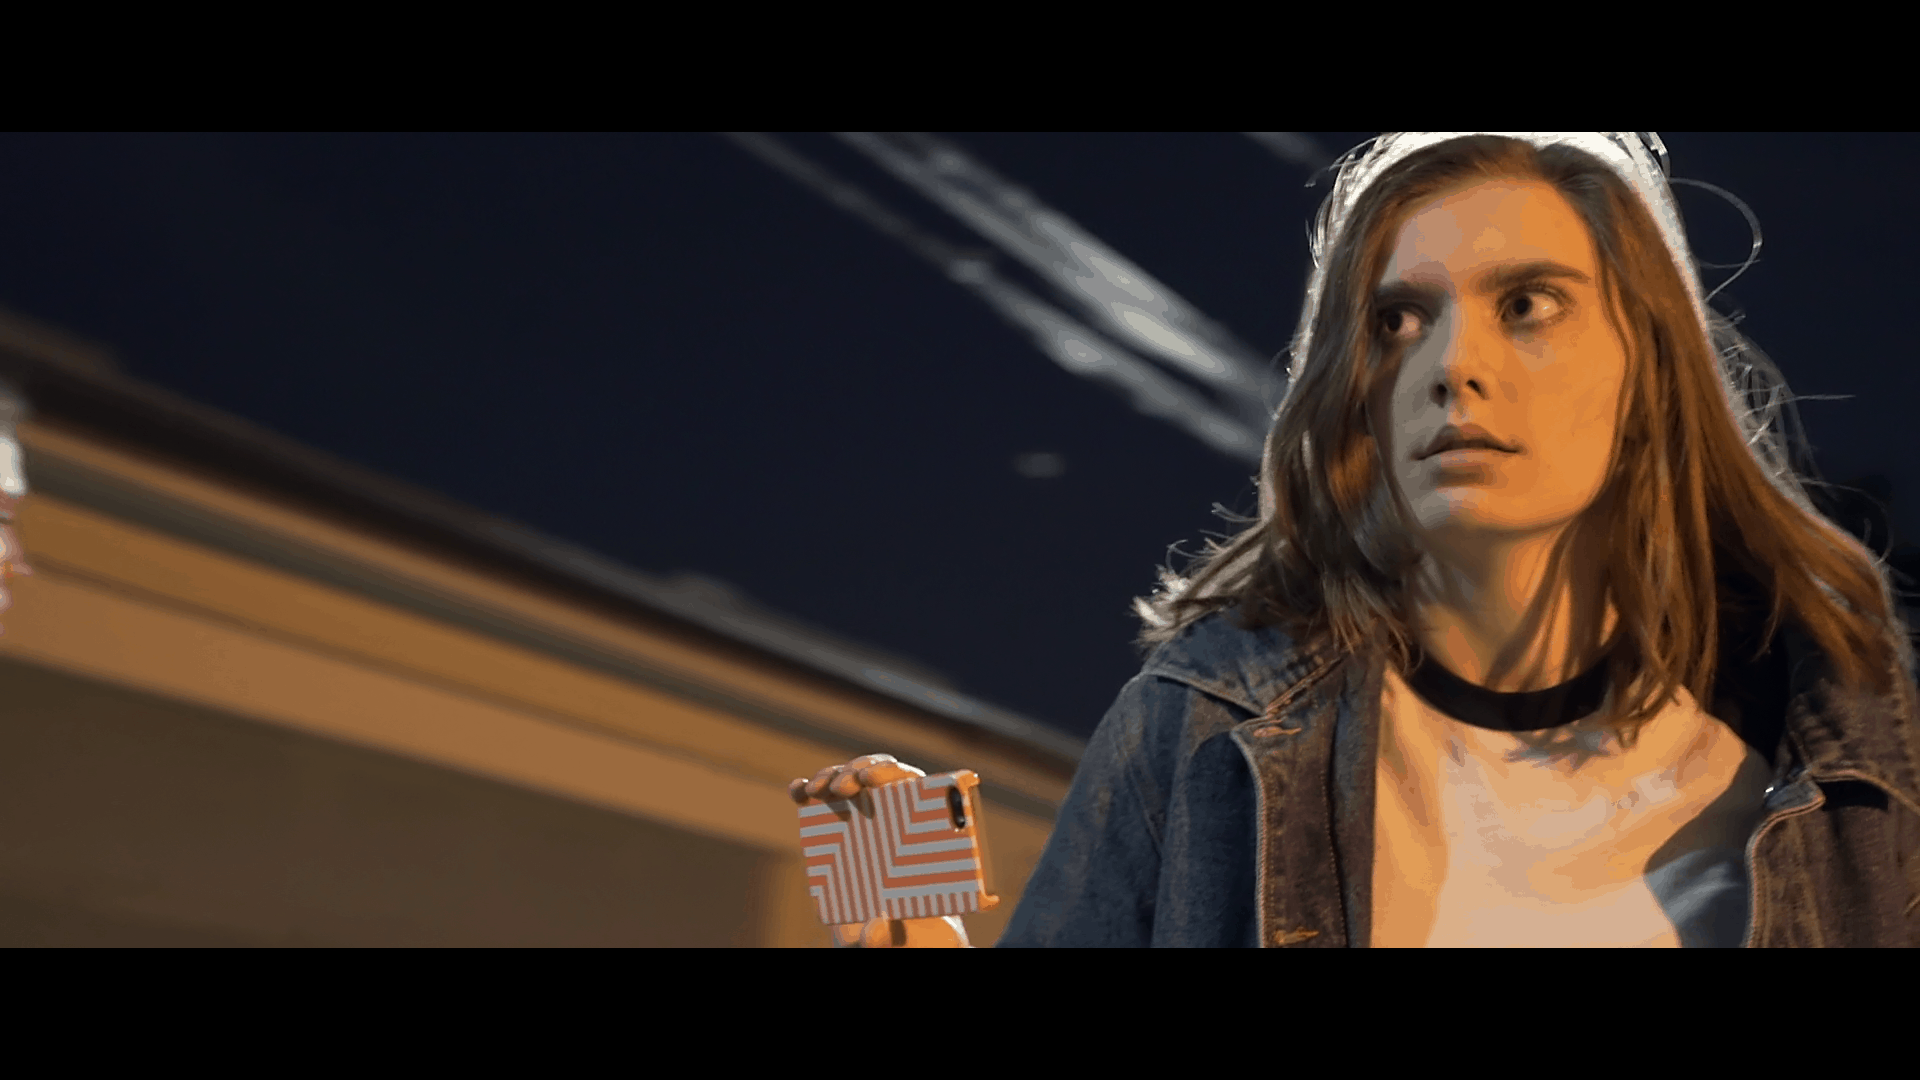 Impossible Horror Reviewed by the Mind Reels Lily (Haley Walker) searching for the scream in an alleyway holding an iphone wearing a denim coat